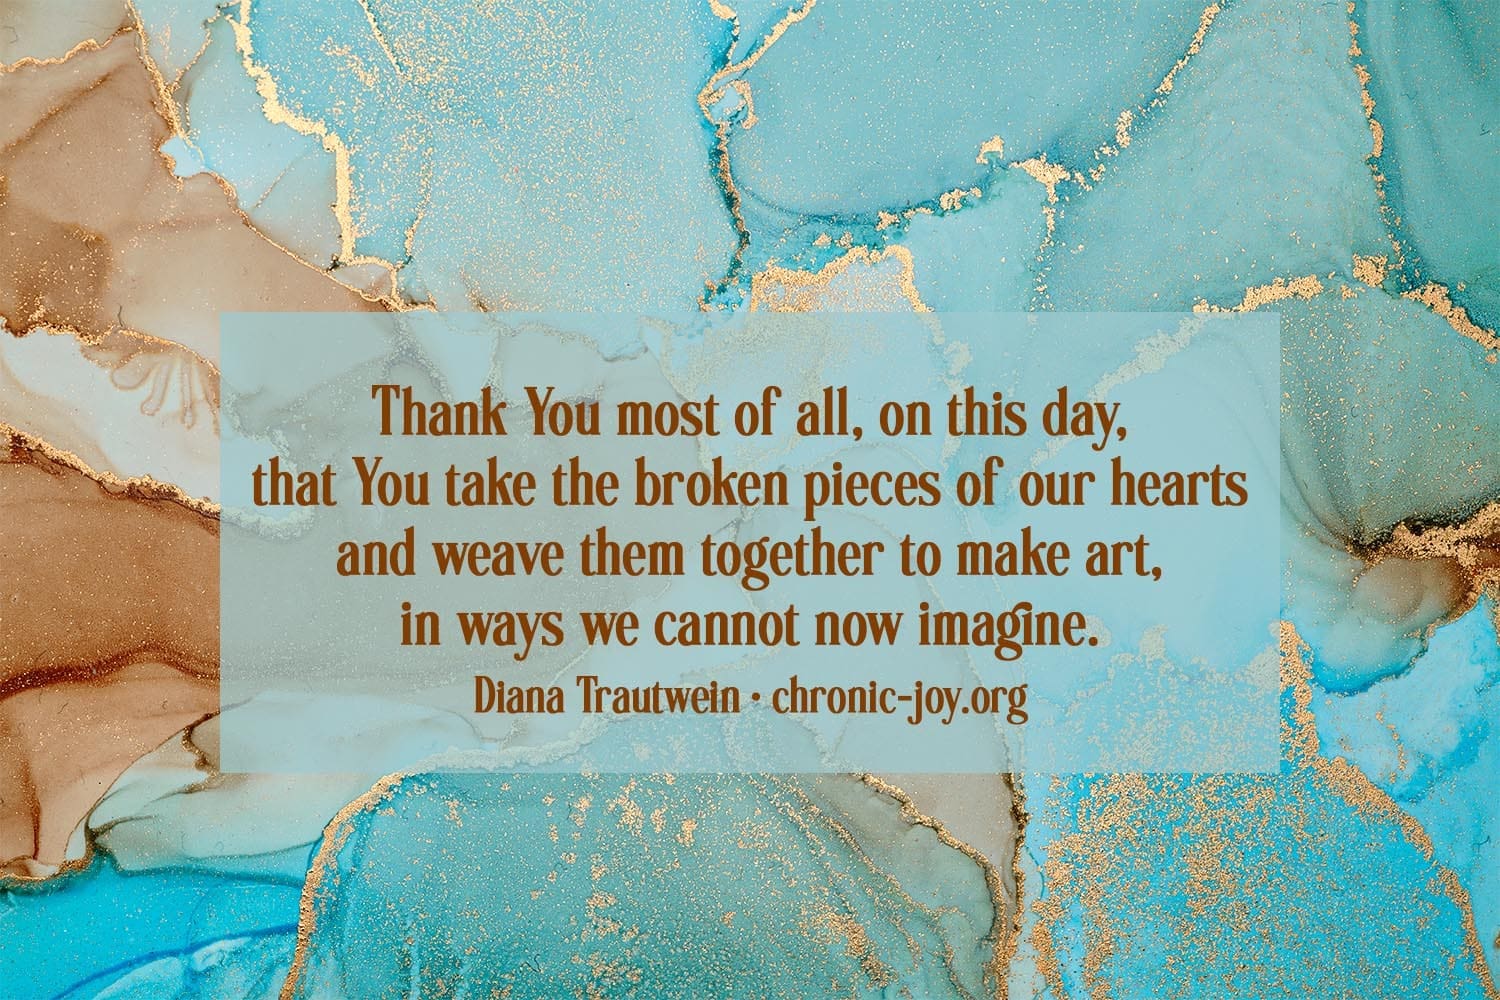 "Thank You most of all, on this day, that You take the broken pieces of our hearts and weave them together to make art, in ways we cannot now imagine." Diana Trautwein